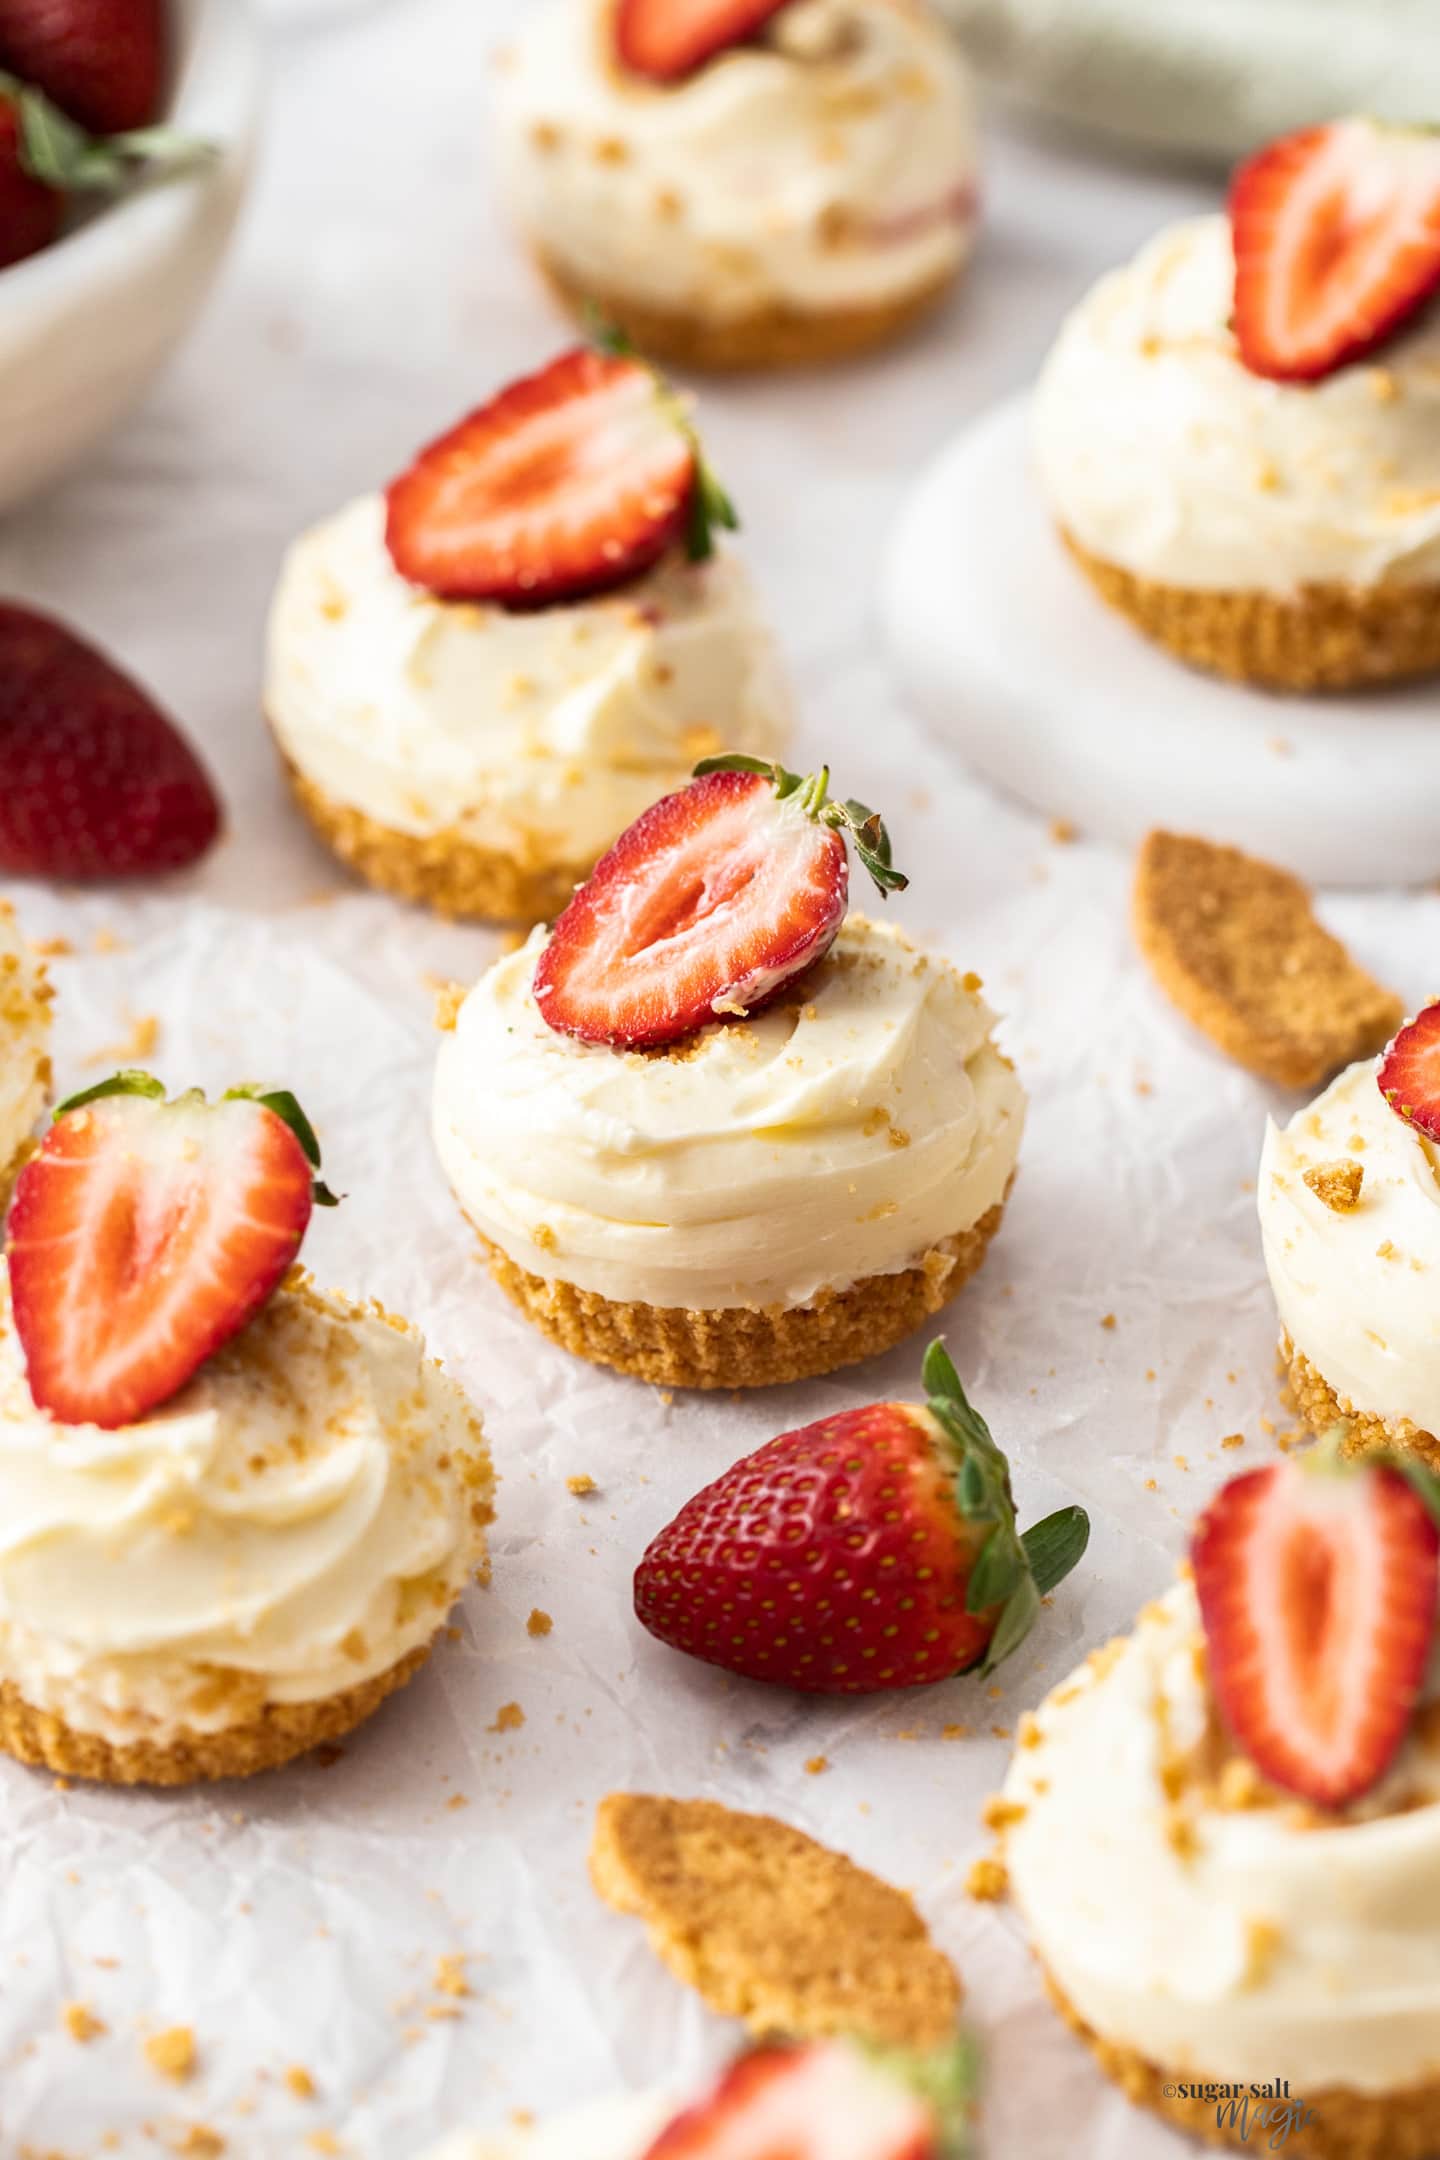 A batch of mini strawberry cheesecakes on a sheet of baking paper.